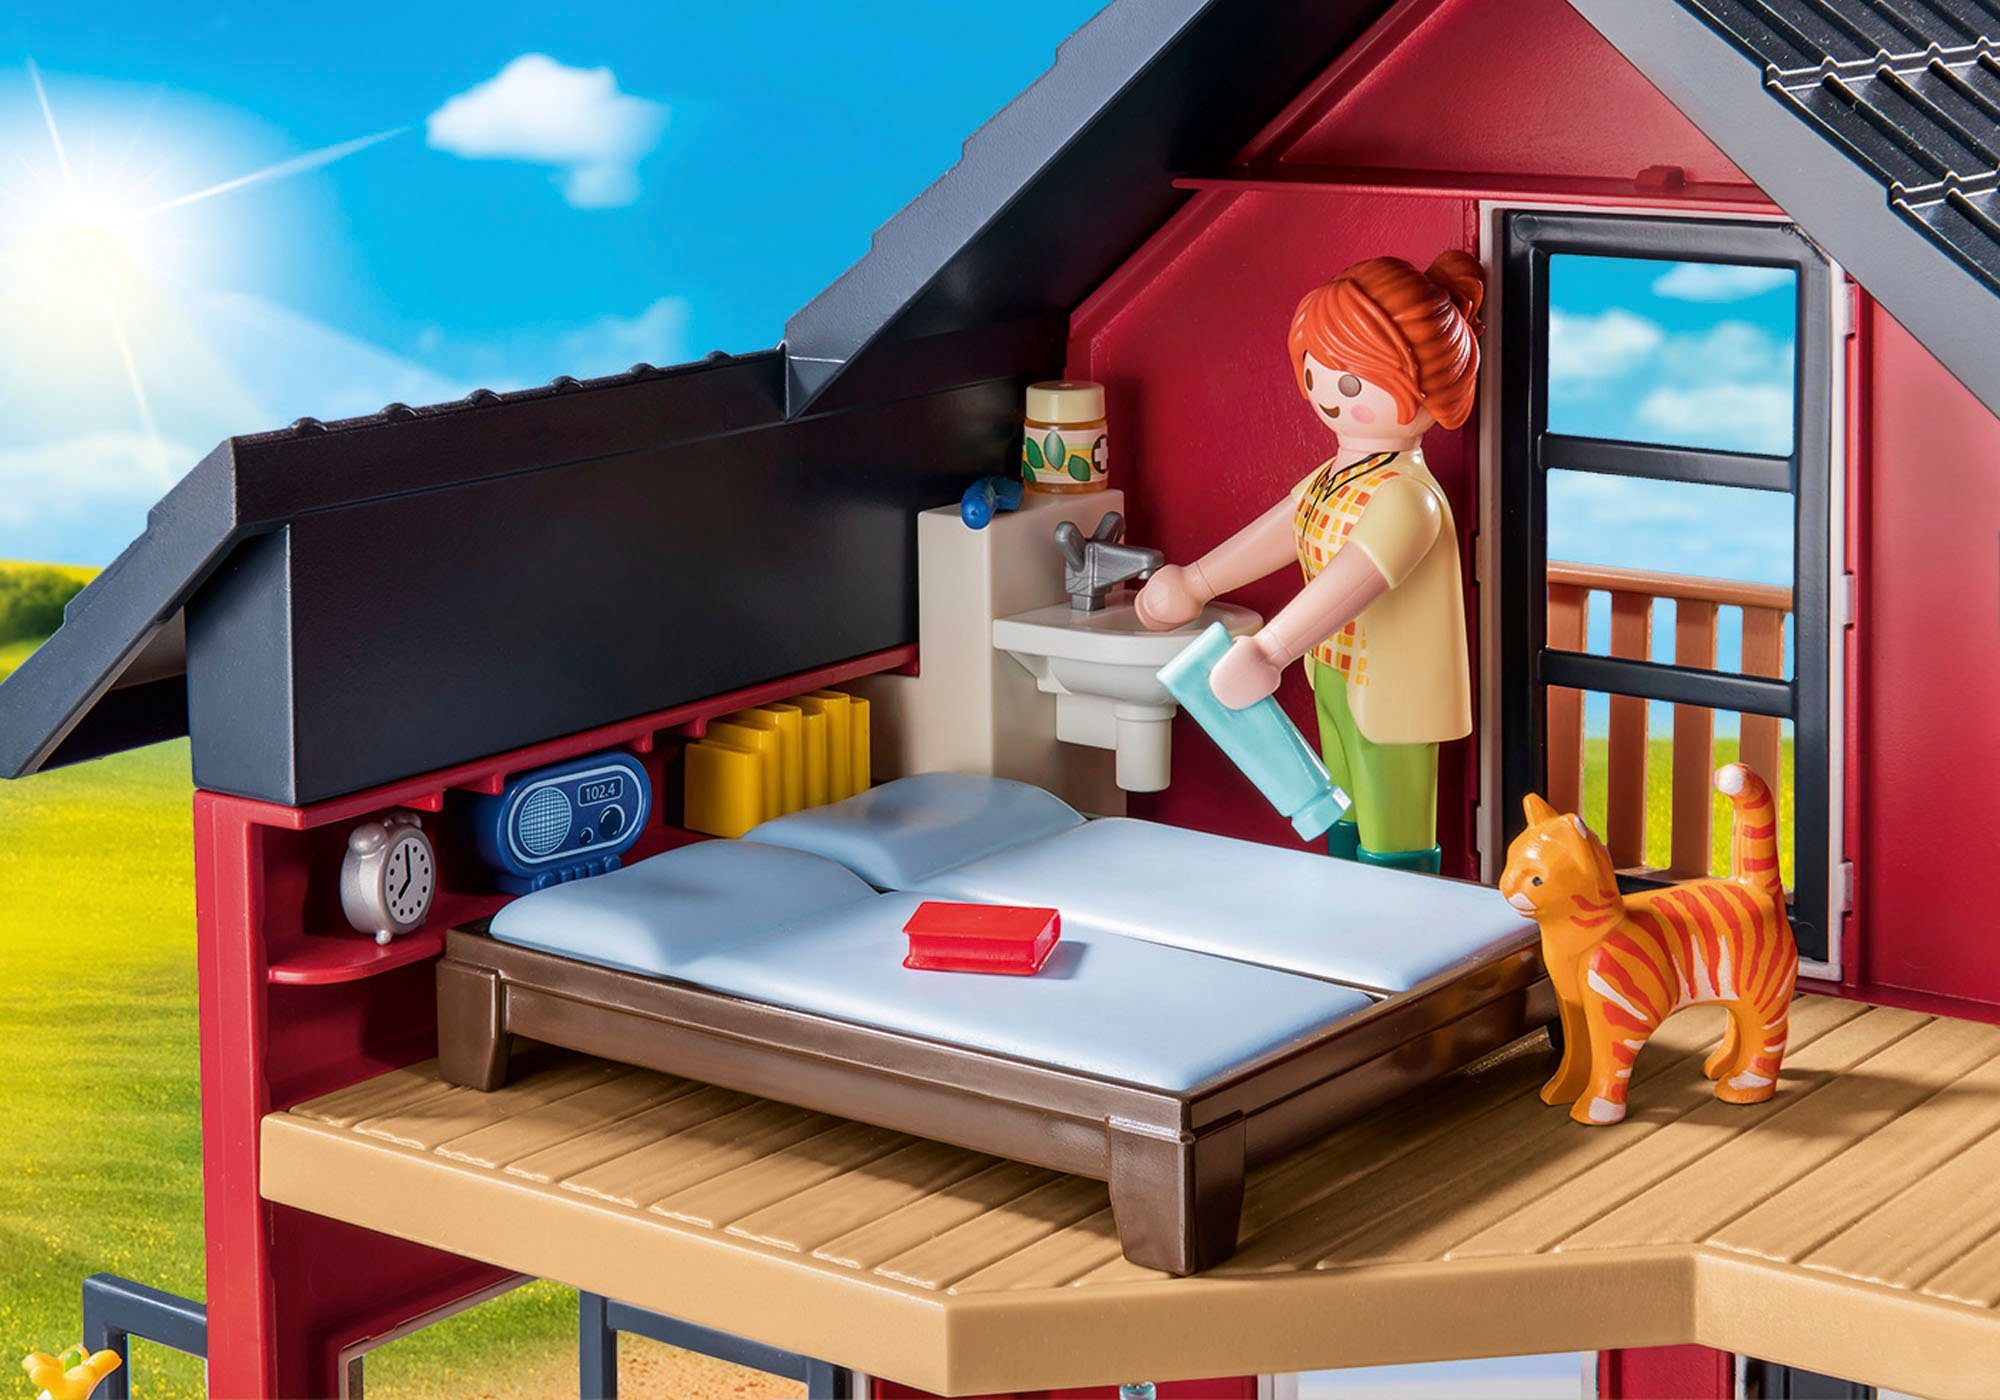 Playmobil® Konstruktions-Spielset Bauernhaus (71248), Country, aus Material; Germany in Made recyceltem teilweise